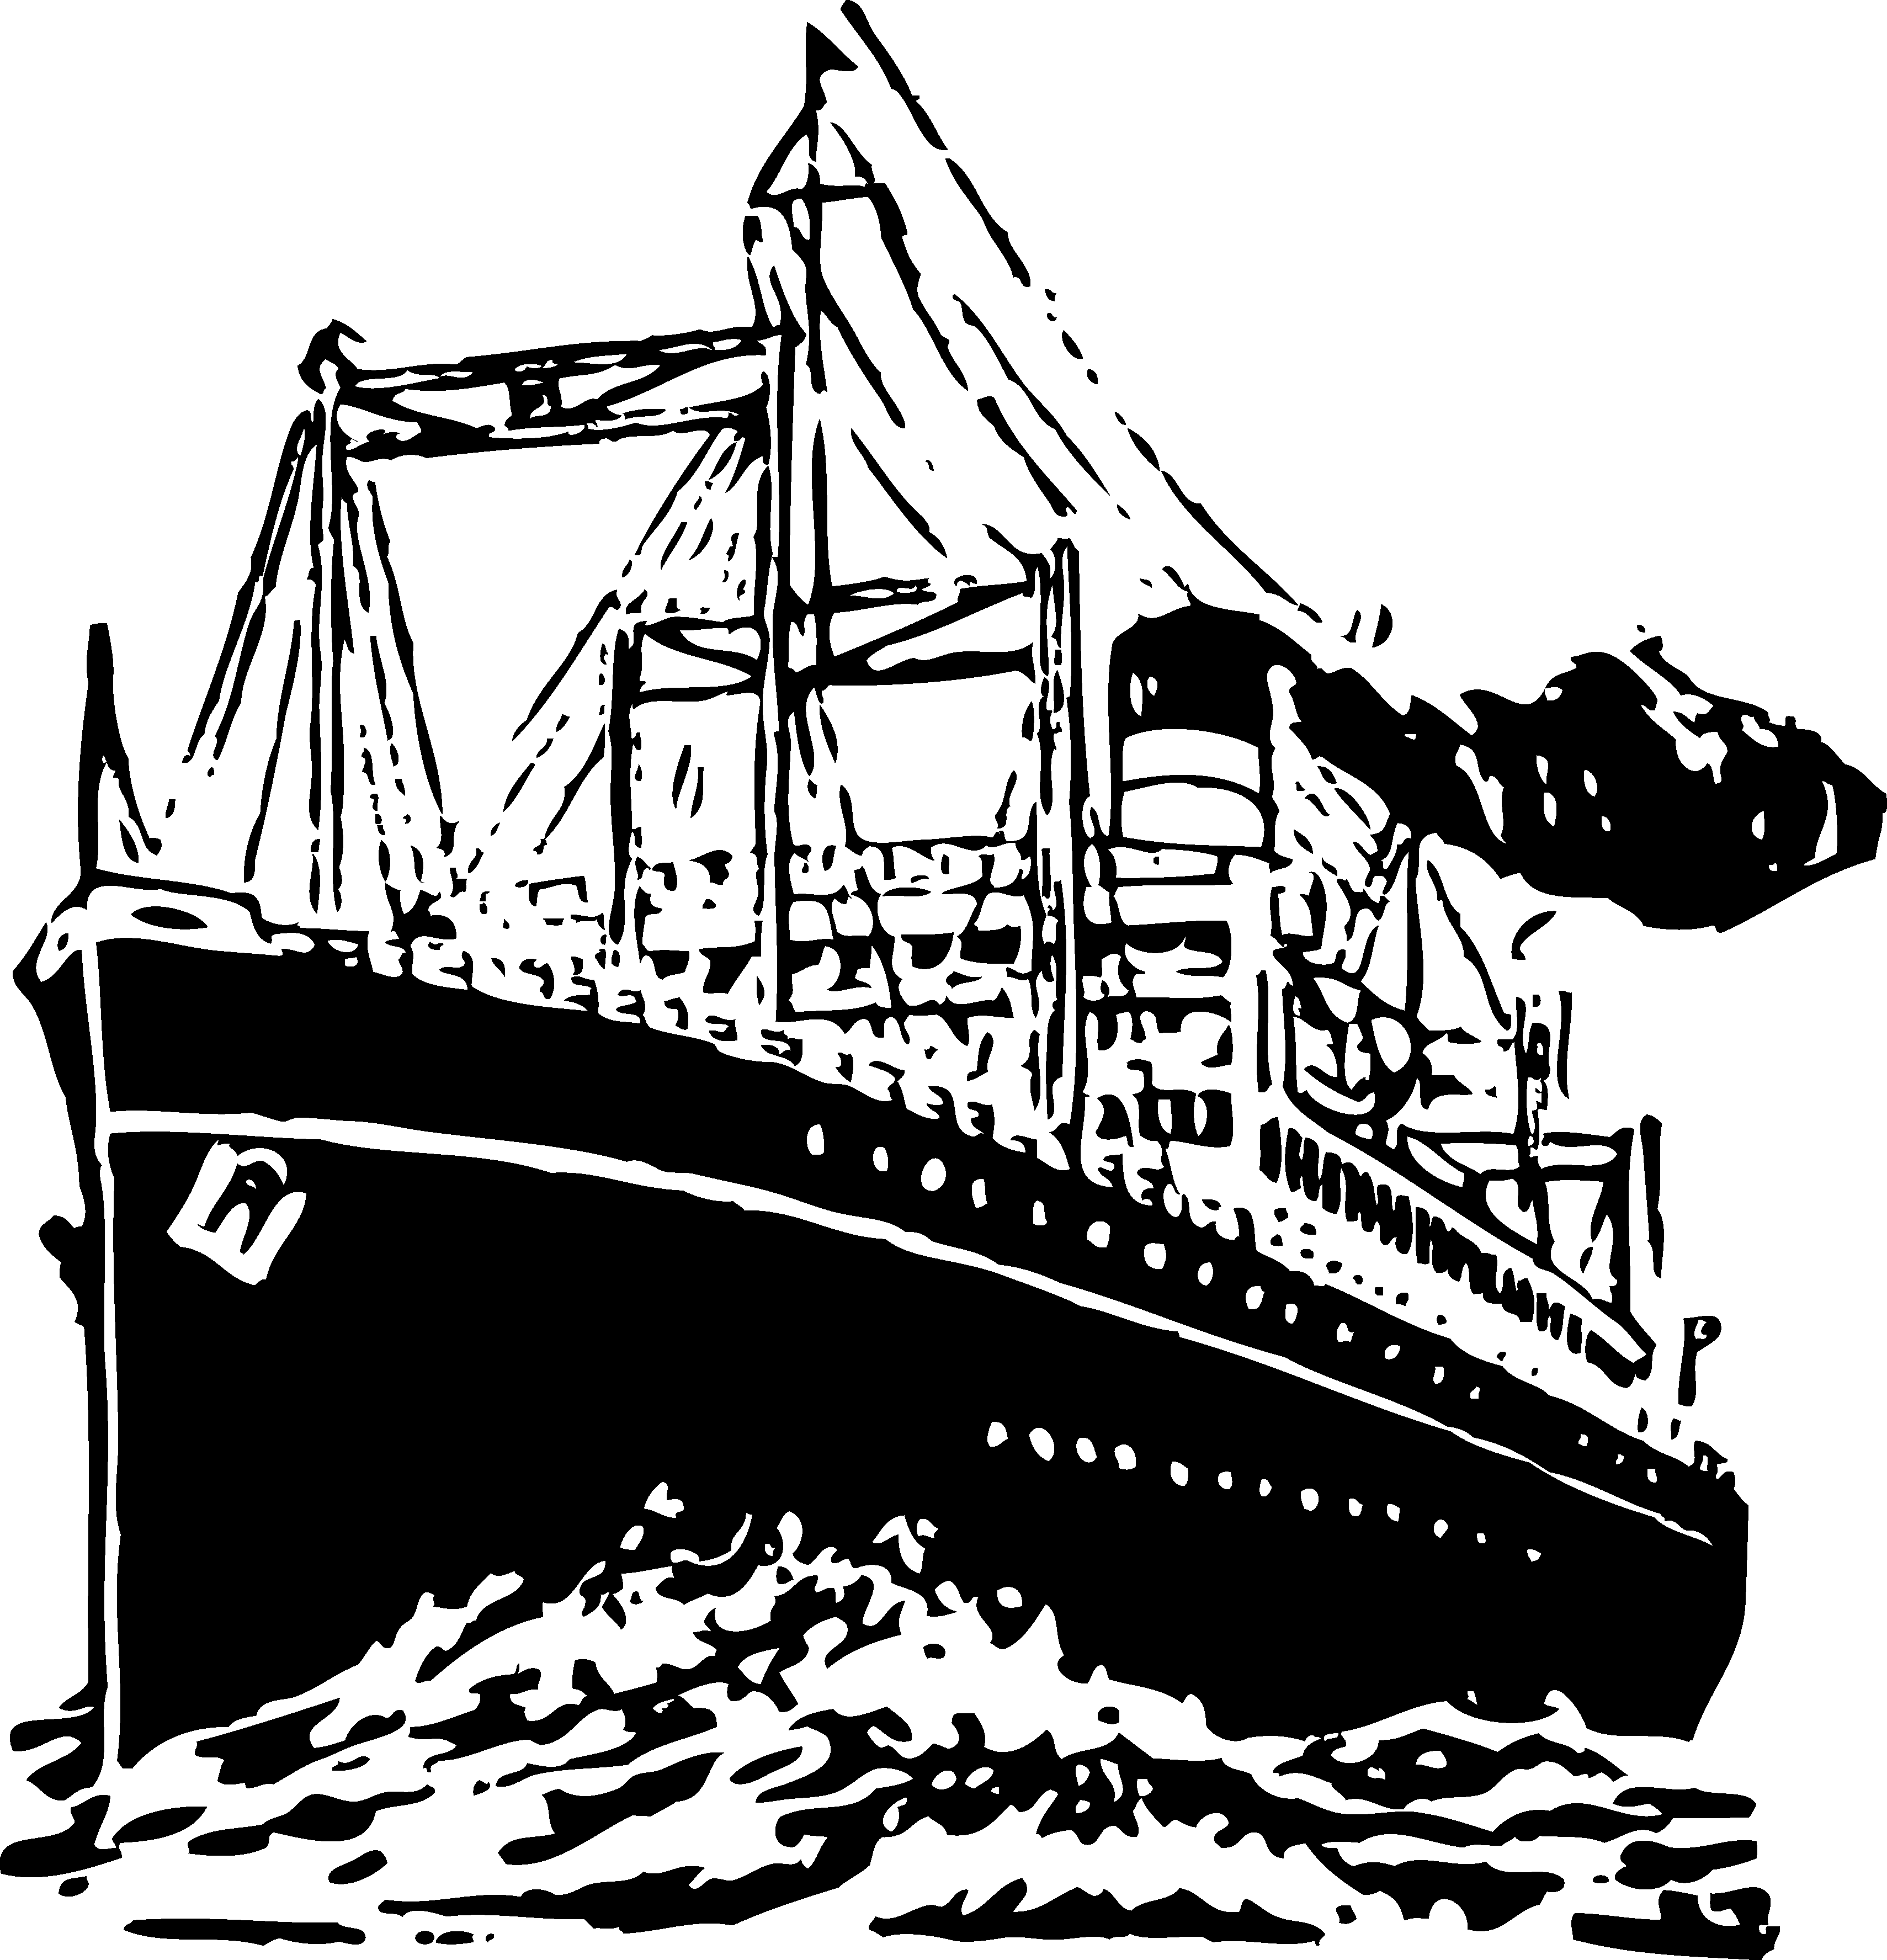 Ship cilpart ingenious vintage. Clipart designs black and white